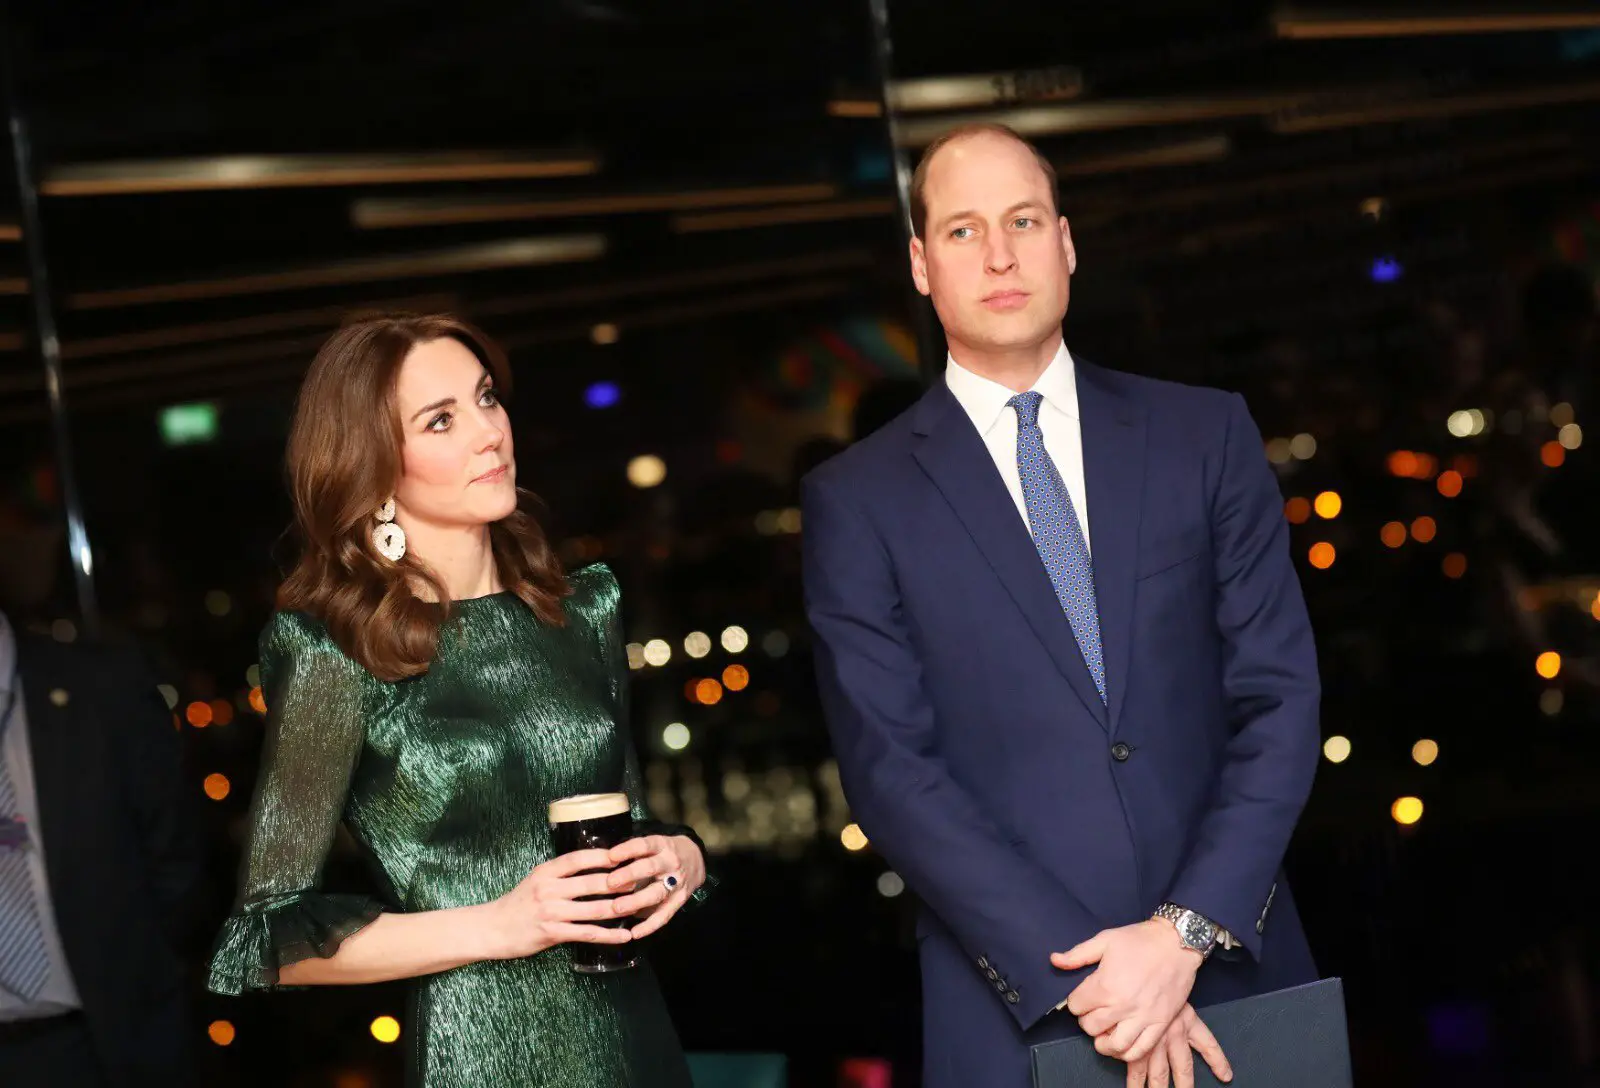 Duke and Duchess of Cambridge attended a reception at Guinness Storehouse’s Gravity Bar during Ireland visit in March 2020